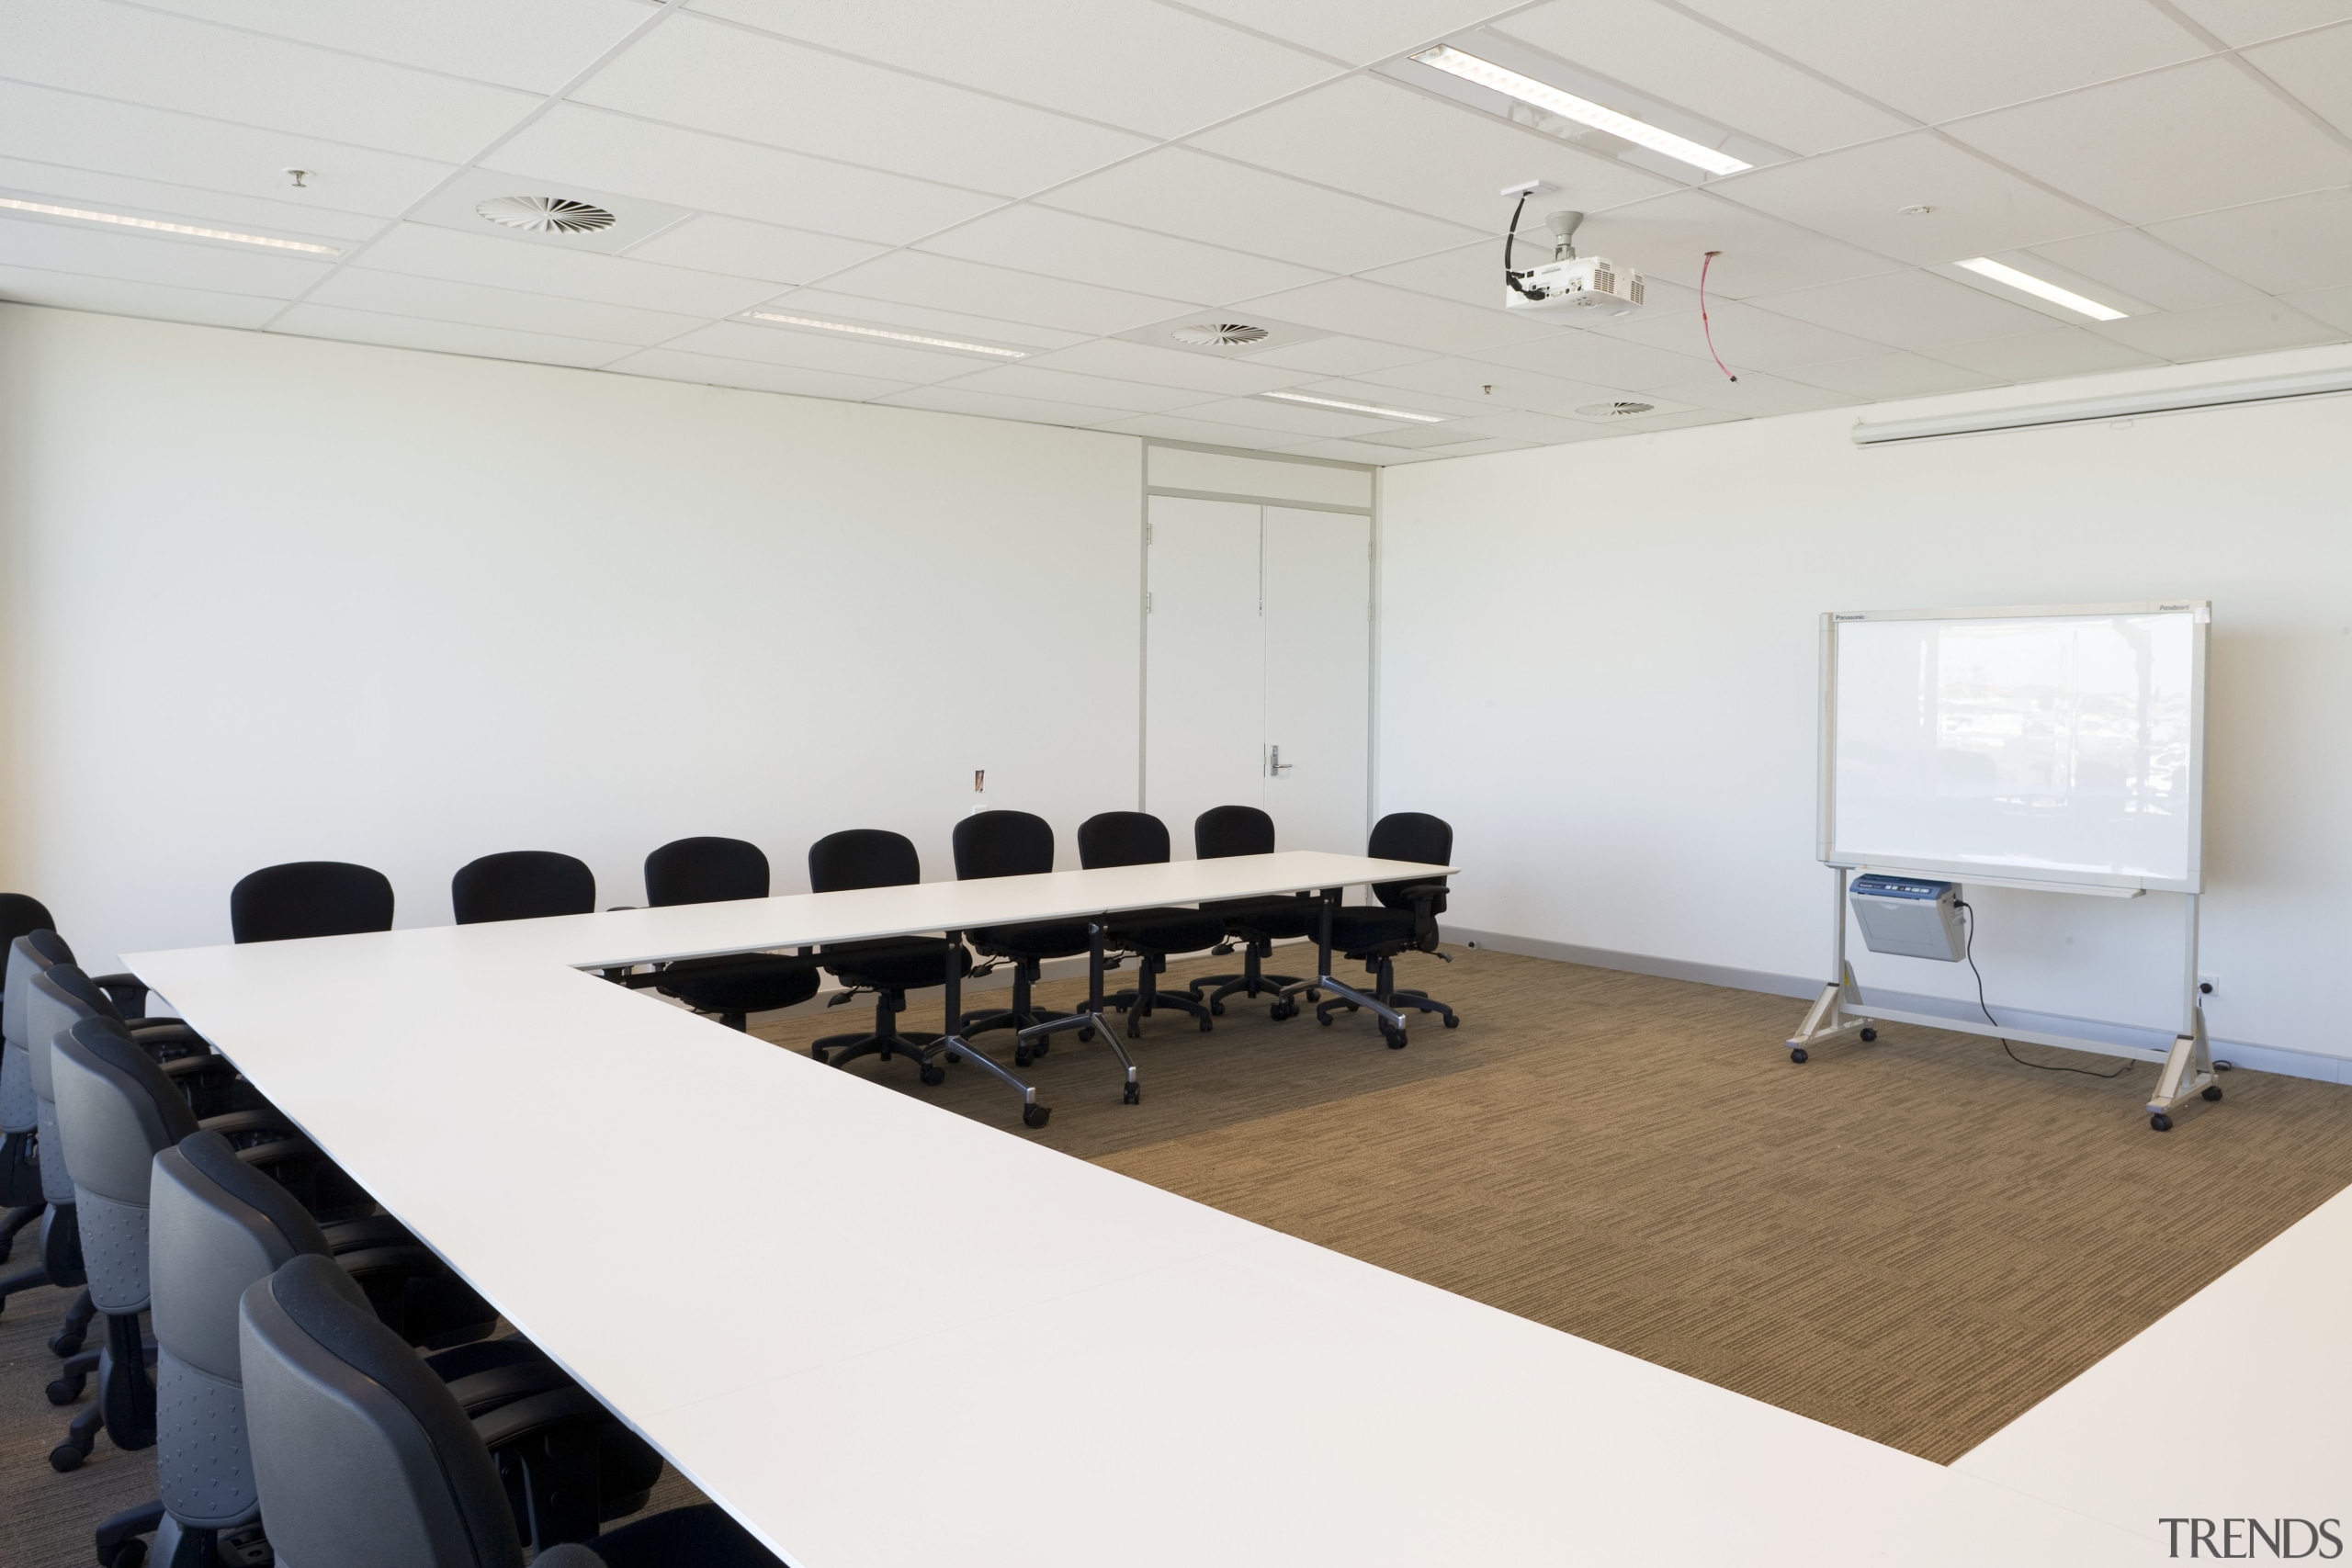 Comprehensive data, communications and IT systems provide optimum auditorium, classroom, conference hall, furniture, office, product design, table, white